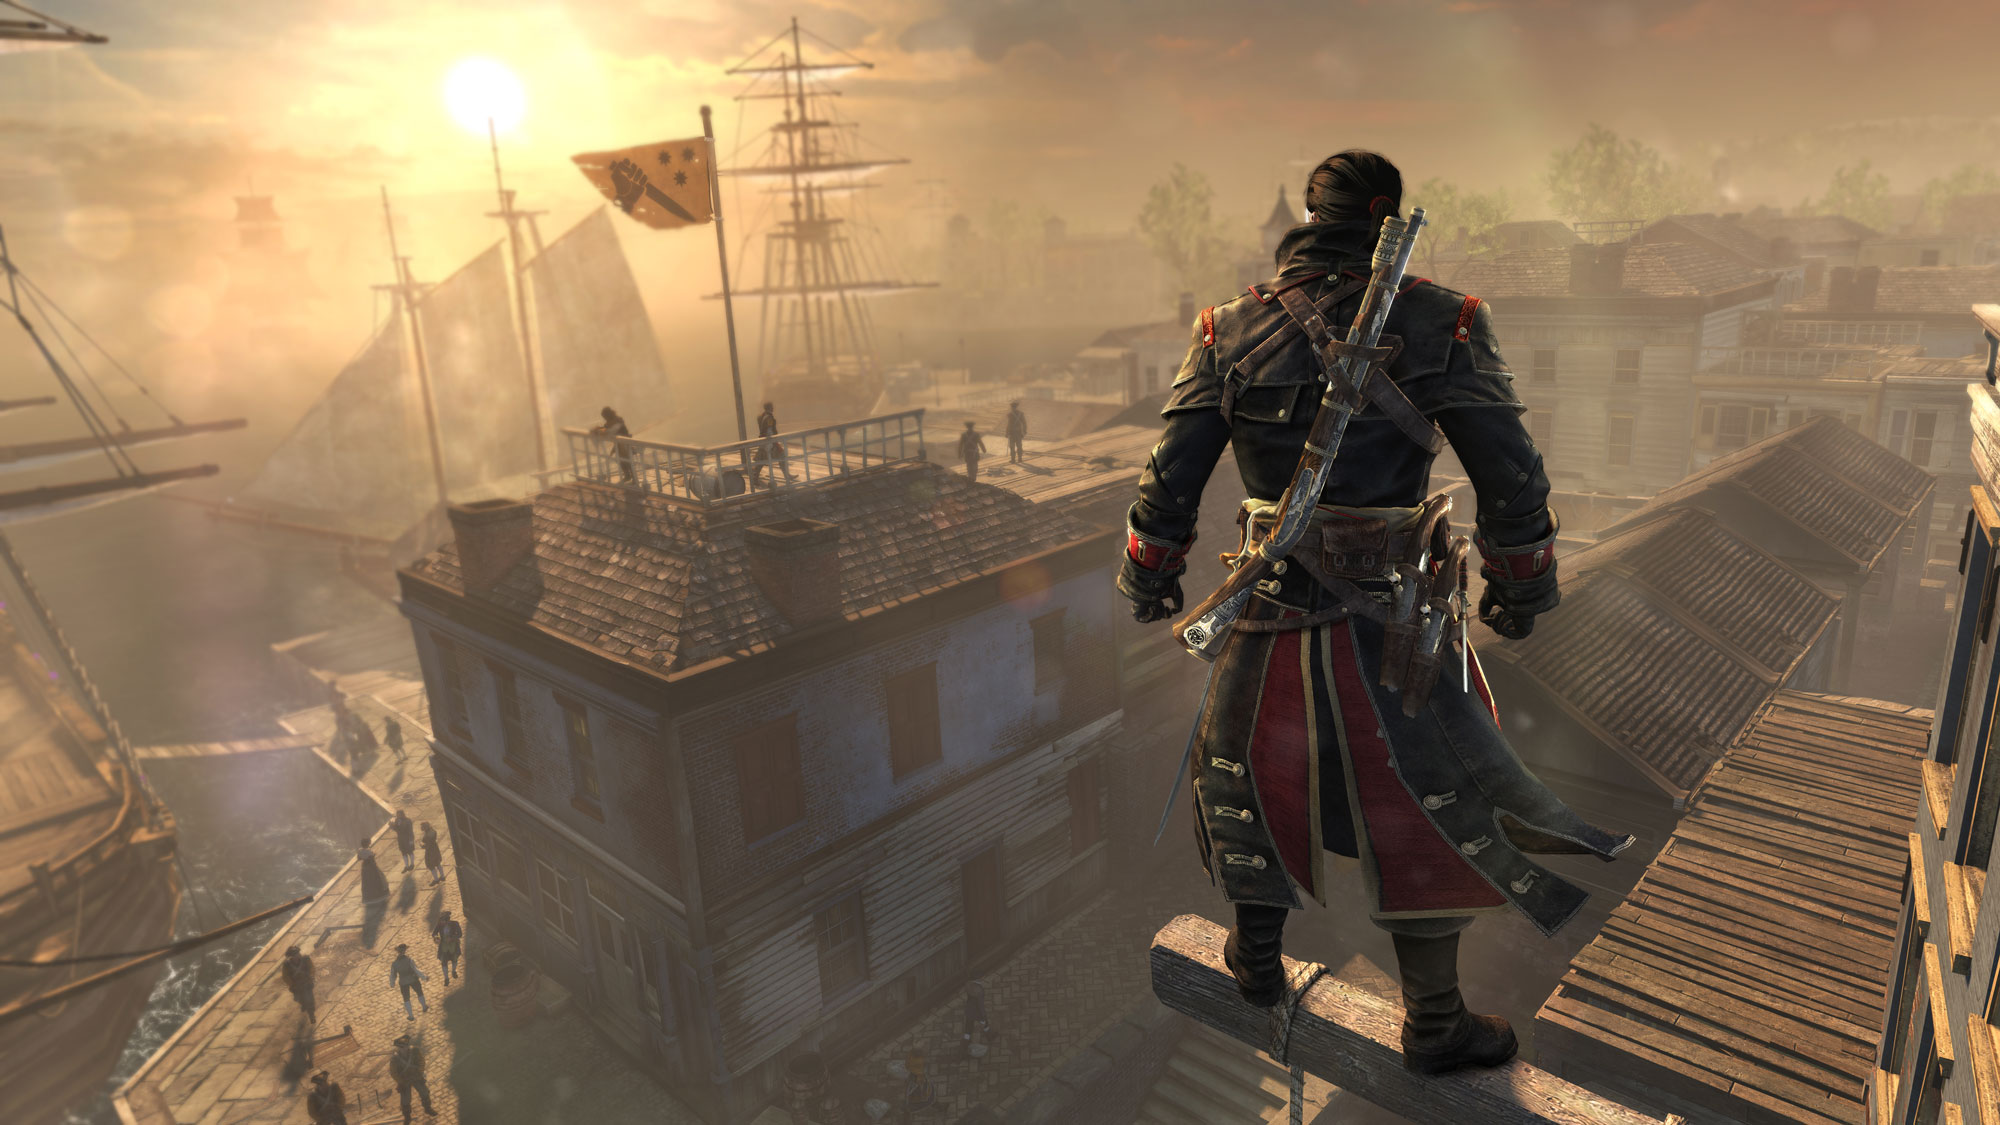 assassin's creed, video game, assassin's creed: rogue